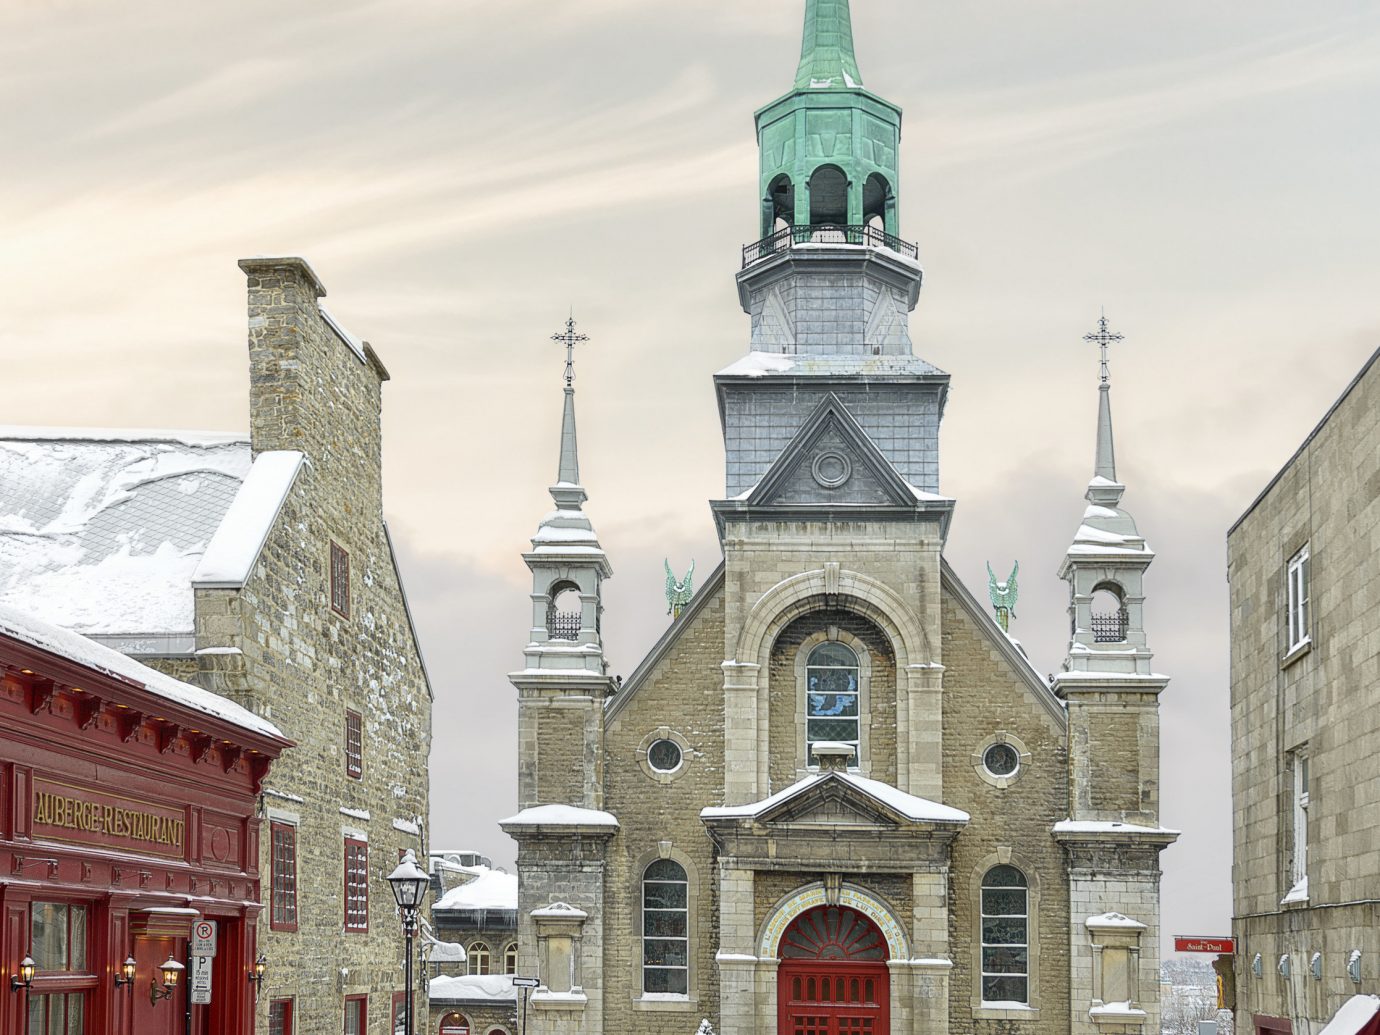 Canada Montreal Toronto Trip Ideas Weekend Getaways snow outdoor building sky Town Winter landmark Church steeple City facade freezing spire tree window place of worship chapel medieval architecture day